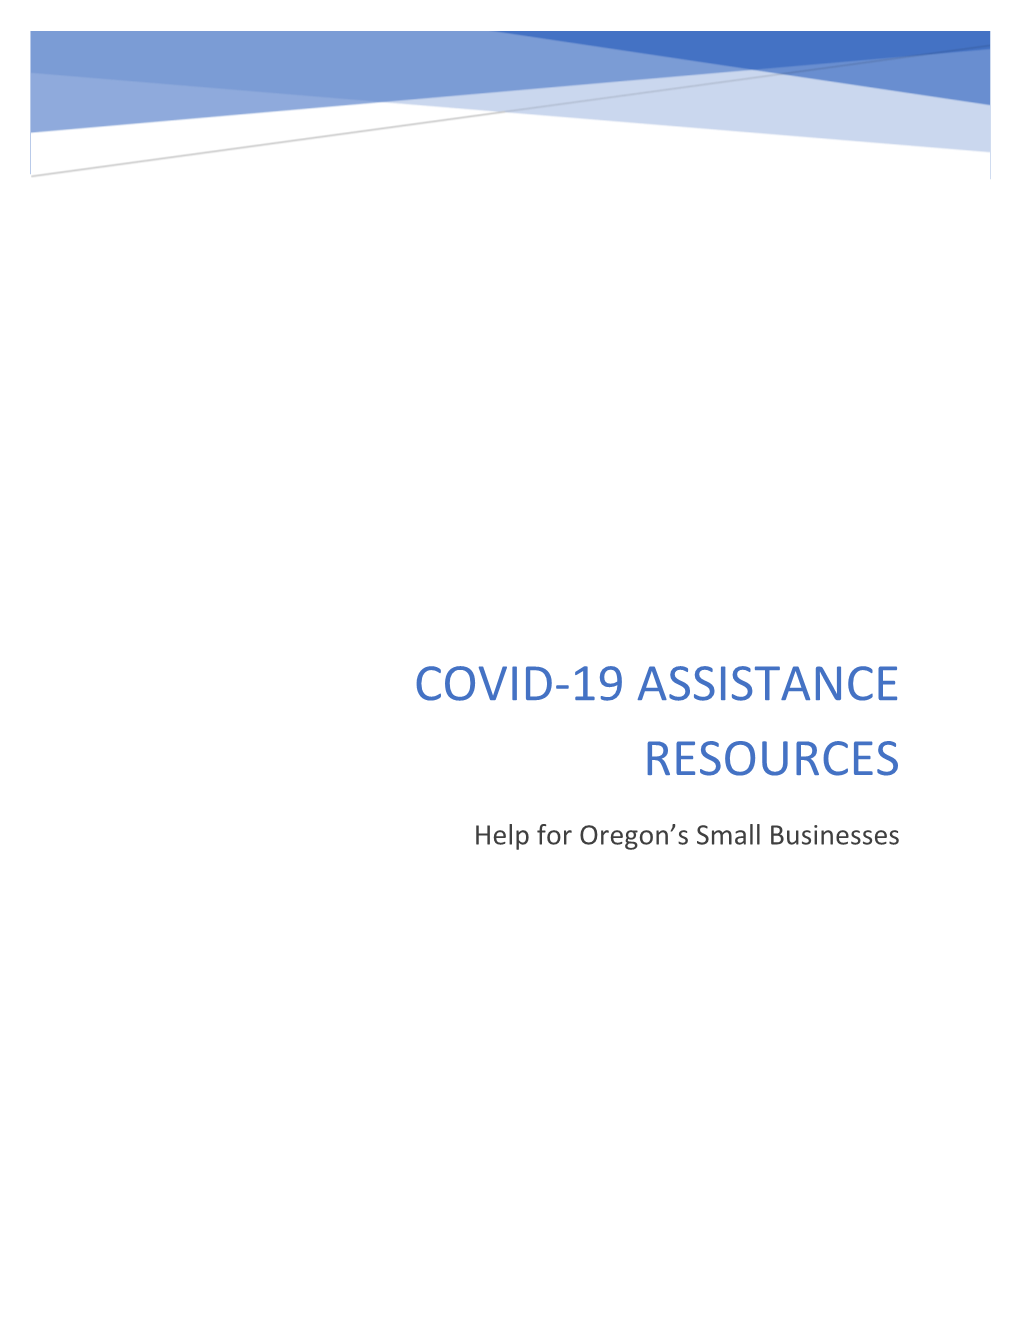 Covid-19 Assistance Resources